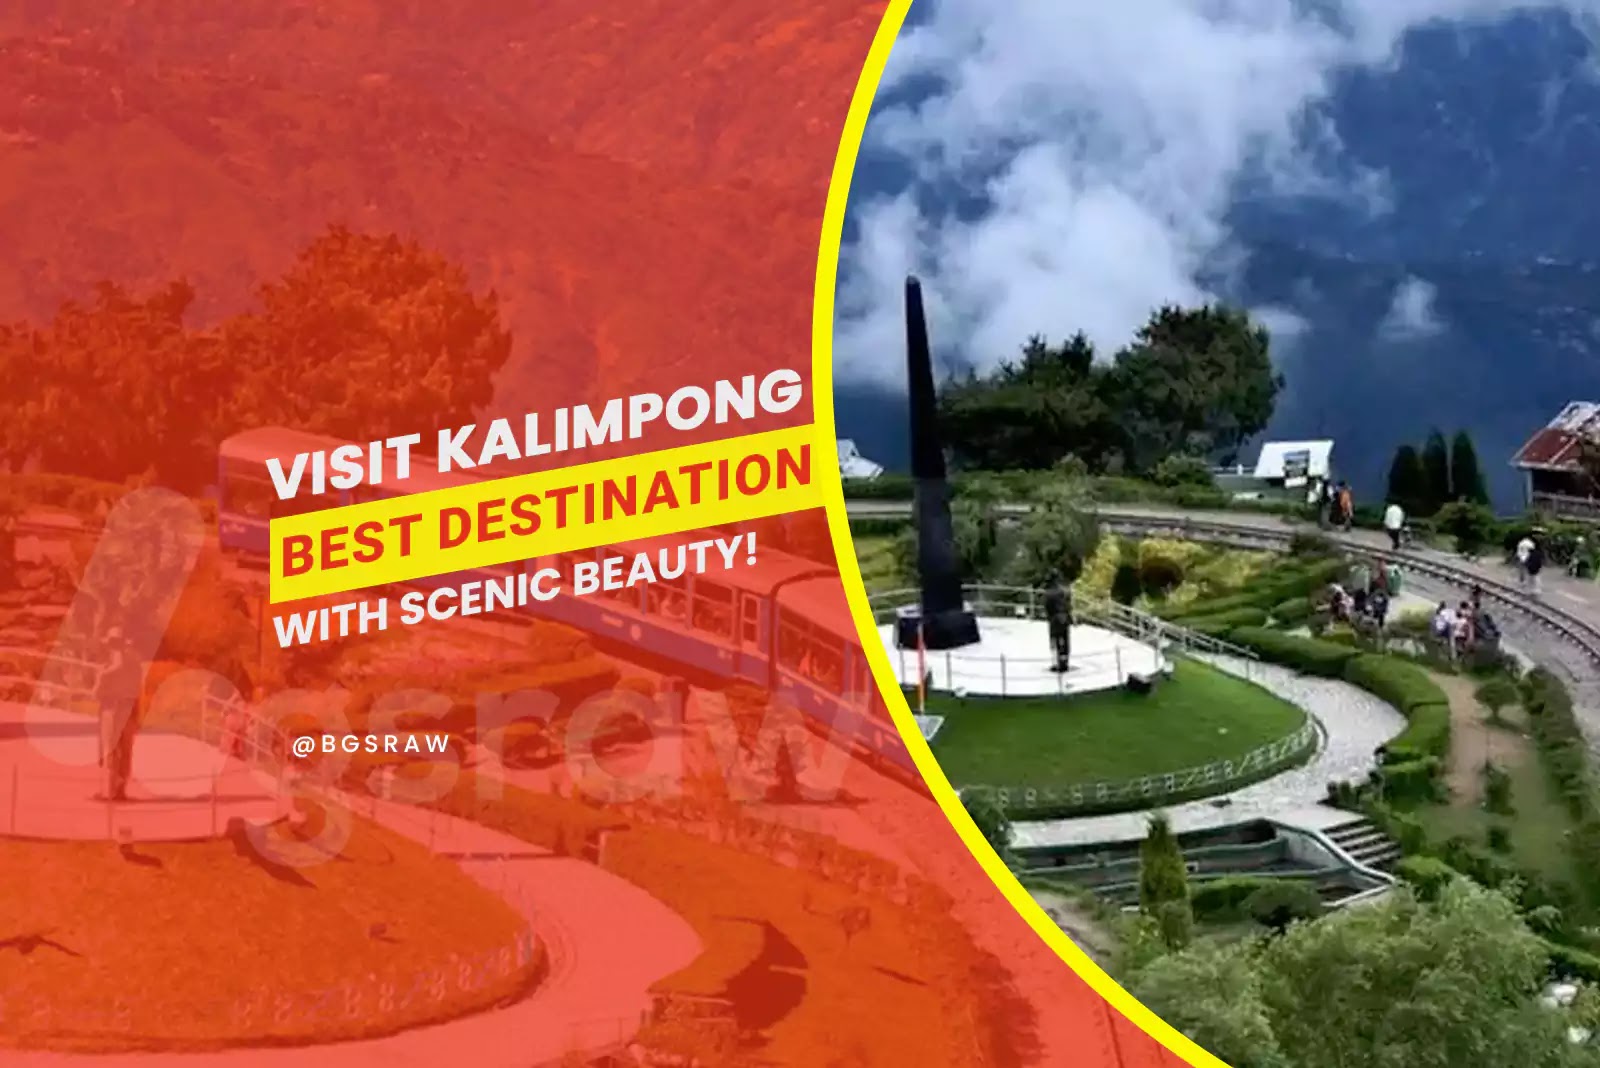 Best destination is Kalimpong for Vacation with scenic beauty for an enjoyable holiday